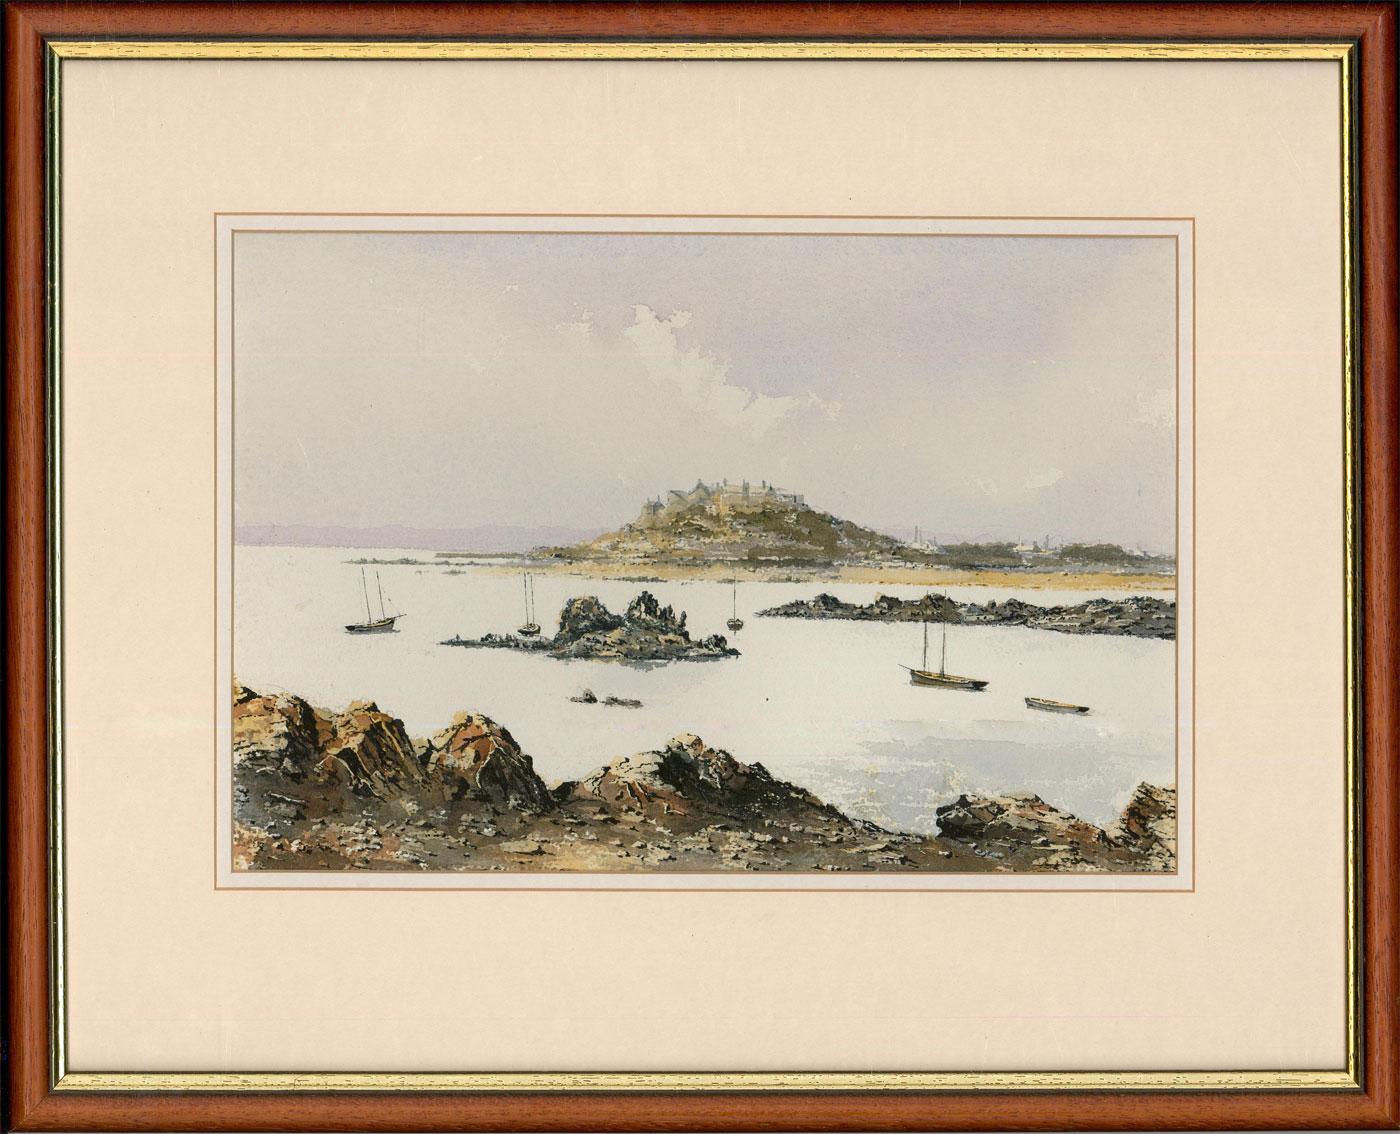 A charming watercolour scene depicting Bordeaux Harbour in Guernsey. the artist captures small fishing boats floating around the island's rocky coastline. Unsigned. Presented in a wooden frame with a gilt slip. On paper.